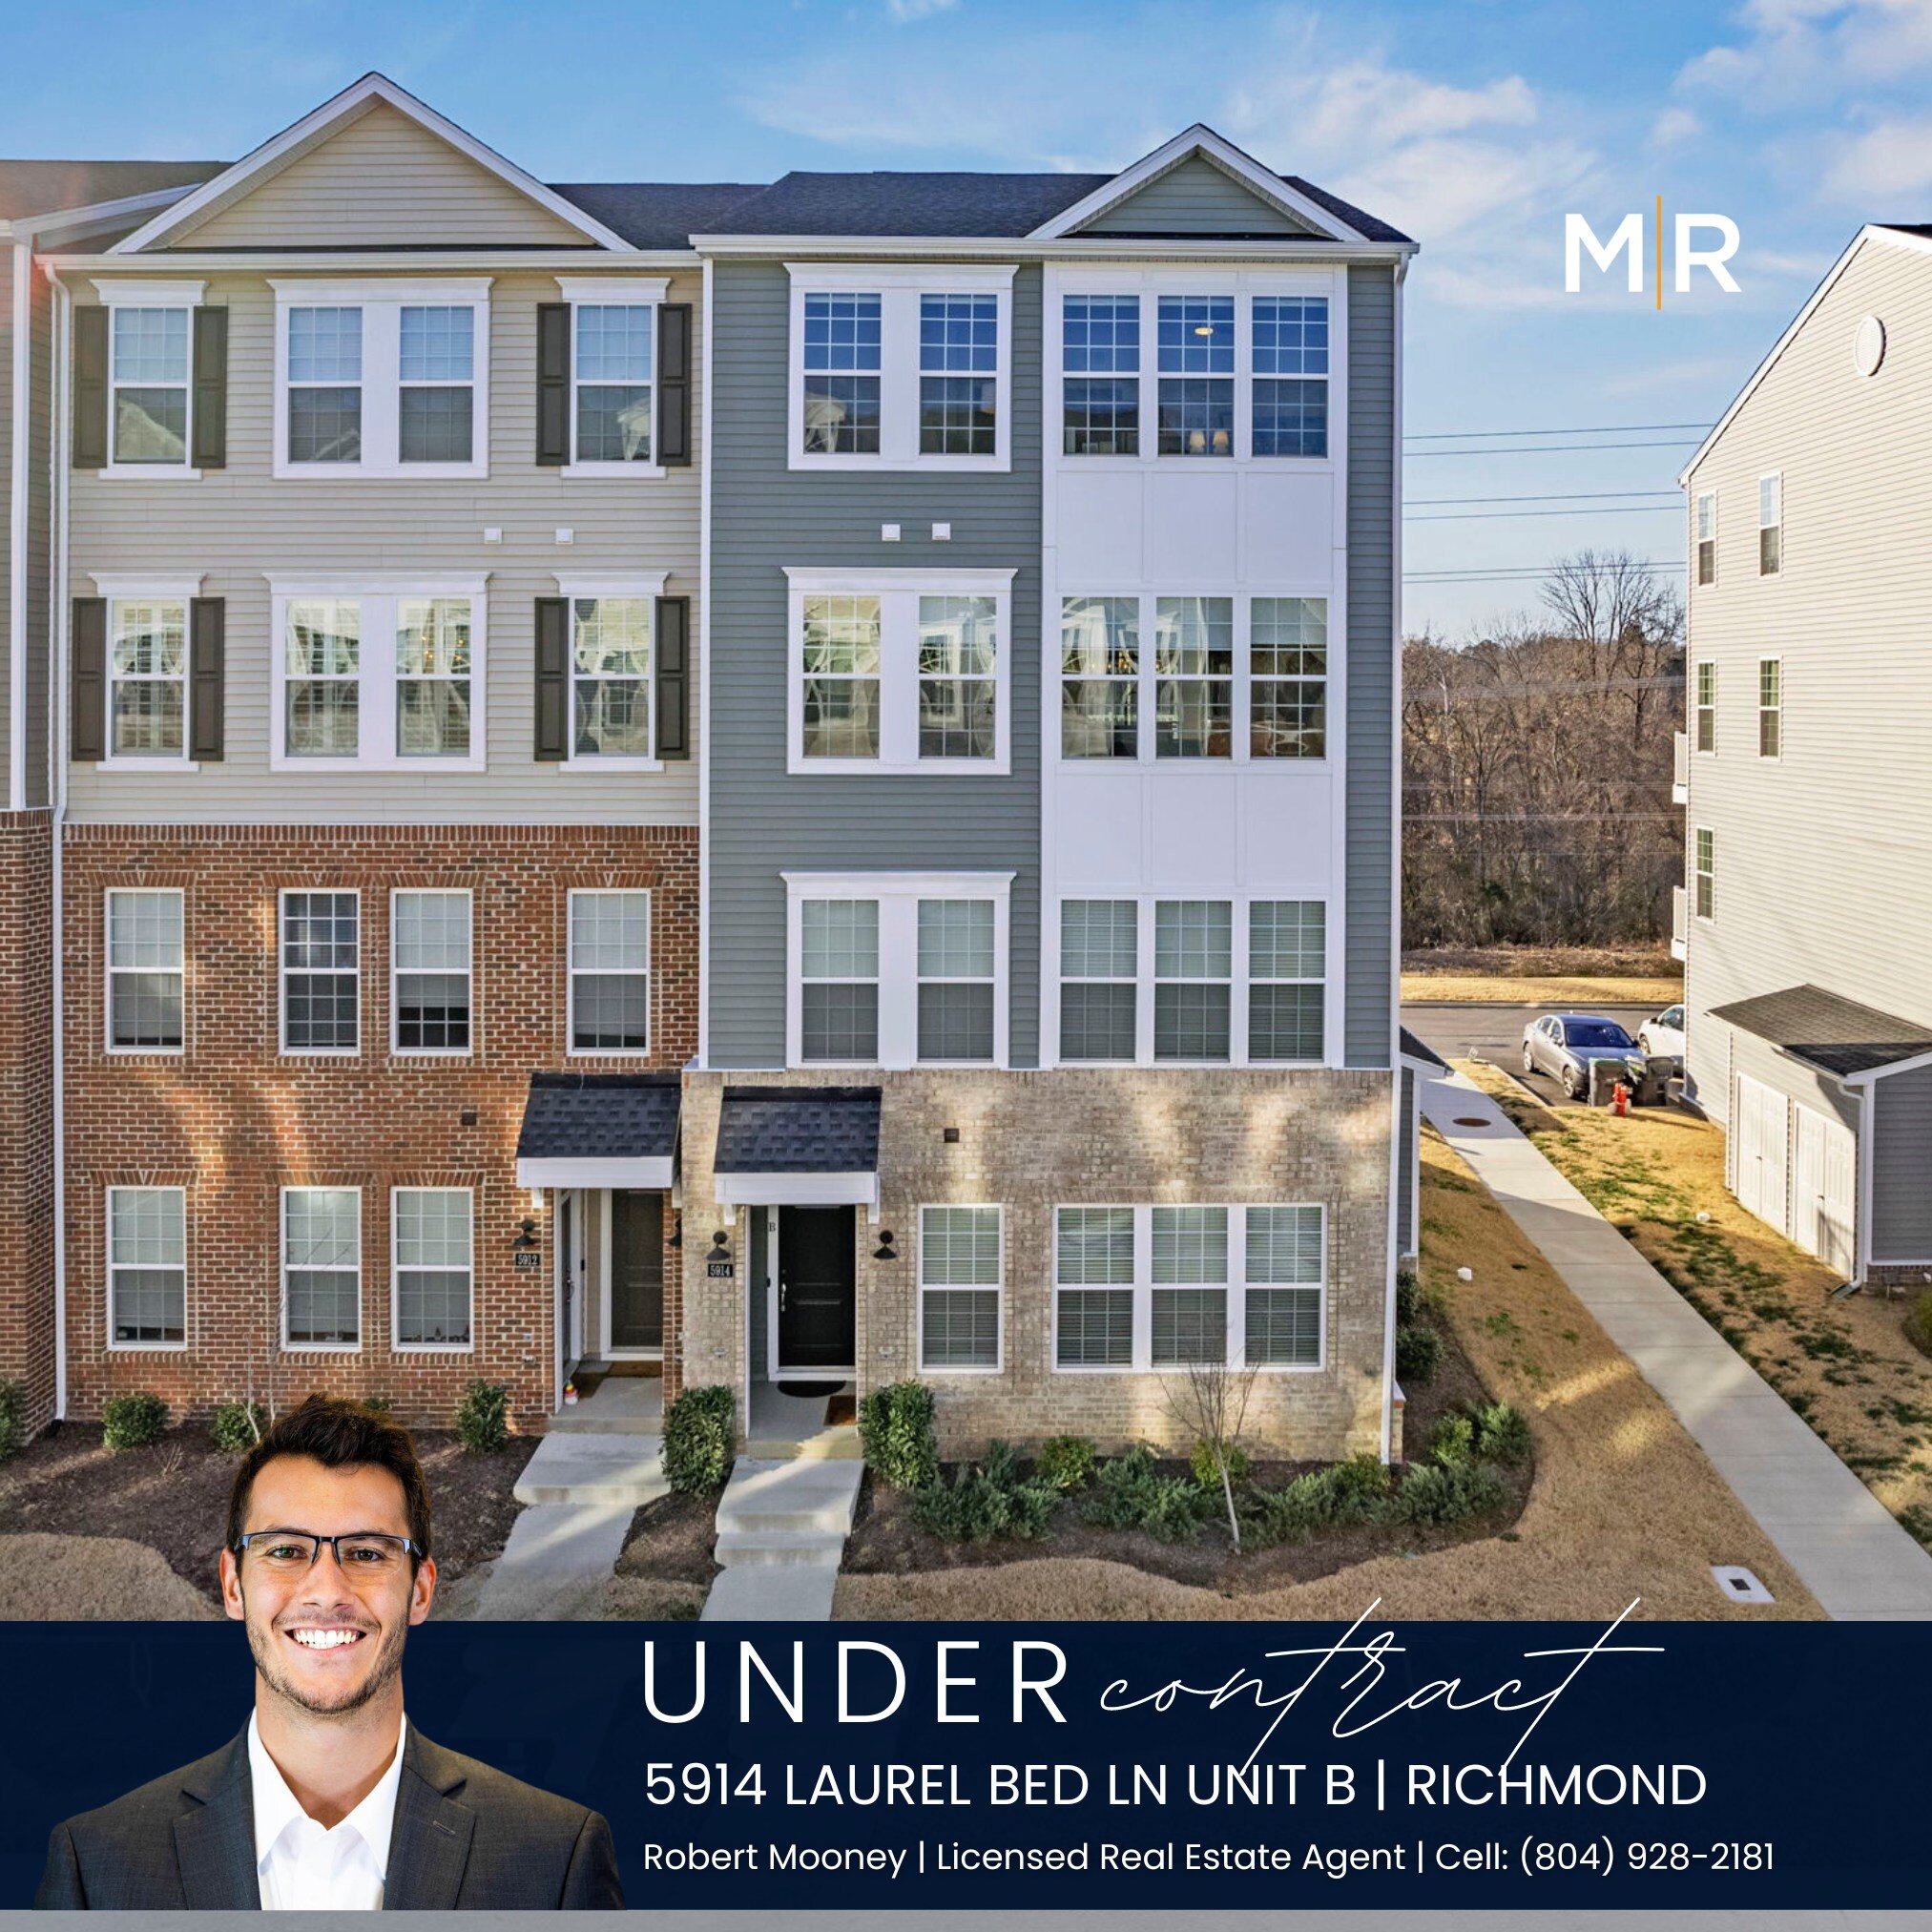 🎉 UNDER CONTRACT IN LESS THAN 3 DAYS! 🏡 The allure of 5914 Laurel Bed Ln just 10 minutes from downtown Richmond was undeniable, and it's now officially under contract! 

Kudos to our exceptional agent, Robert Mooney, for orchestrating this swift su